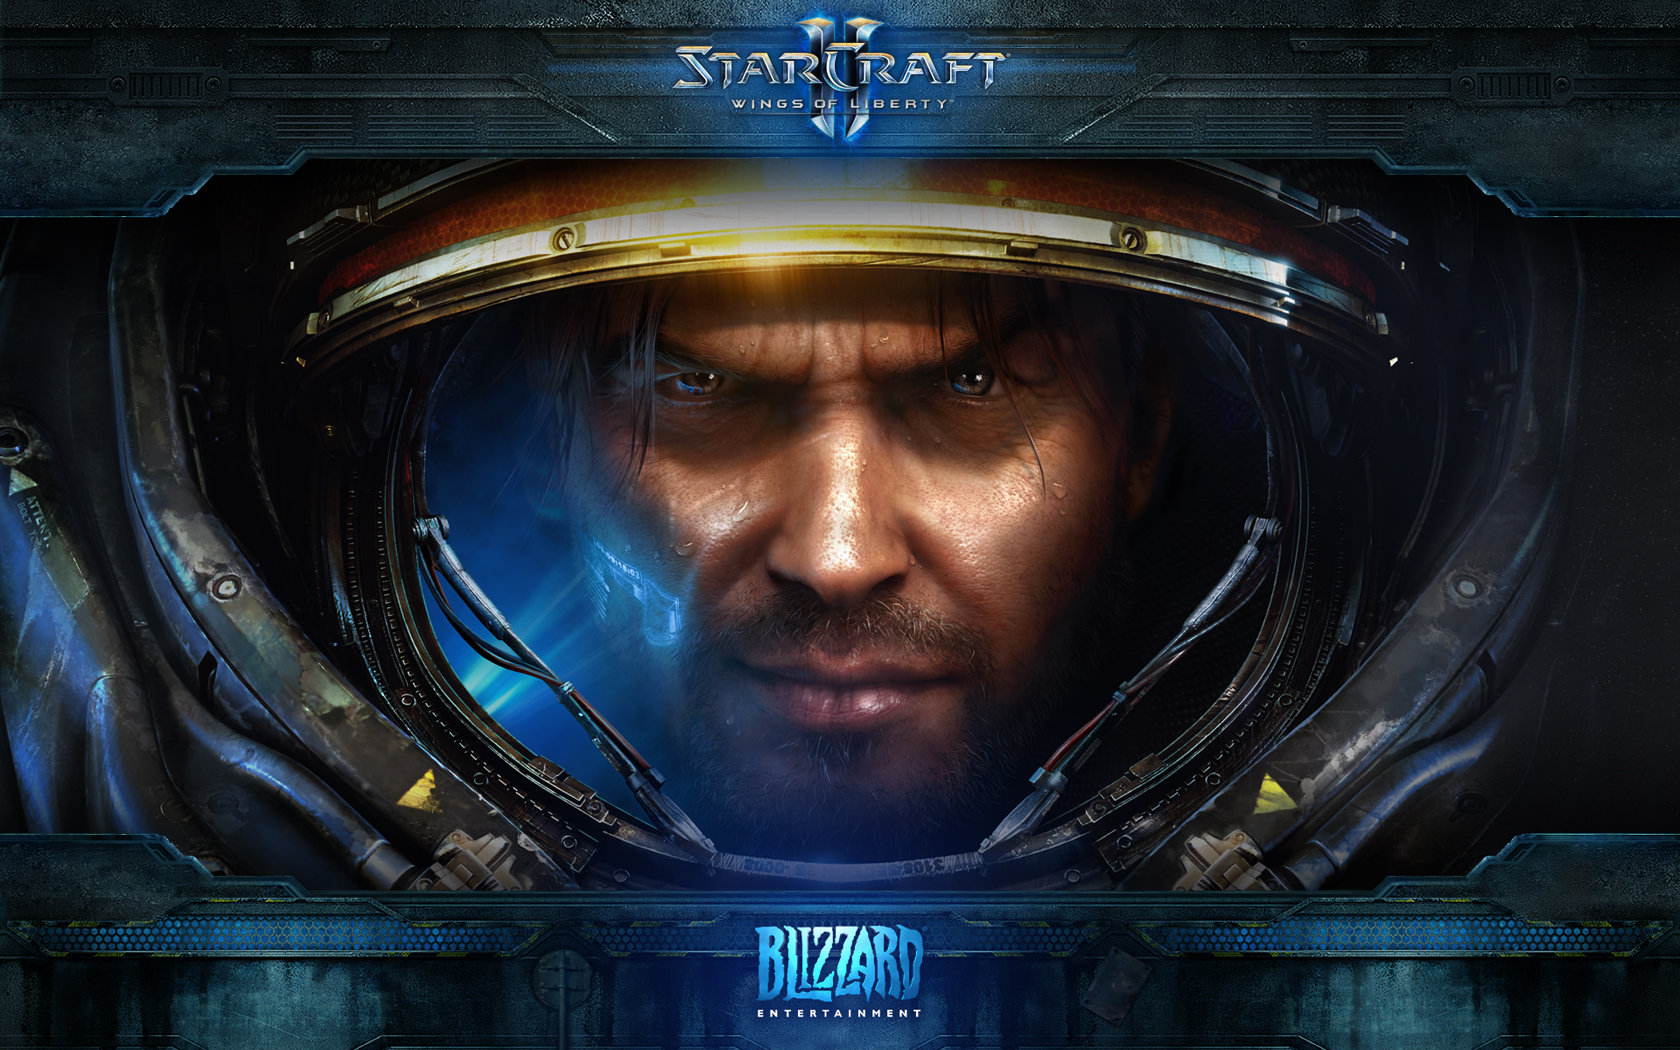 General 1680x1050 video games Starcraft II Jim Raynor StarCraft II: Wings of Liberty soldier armor beard StarCraft II : Heart Of The Swarm Starcraft II: Legacy of the Void Blizzard Entertainment battle.net James Raynor video game art video game characters